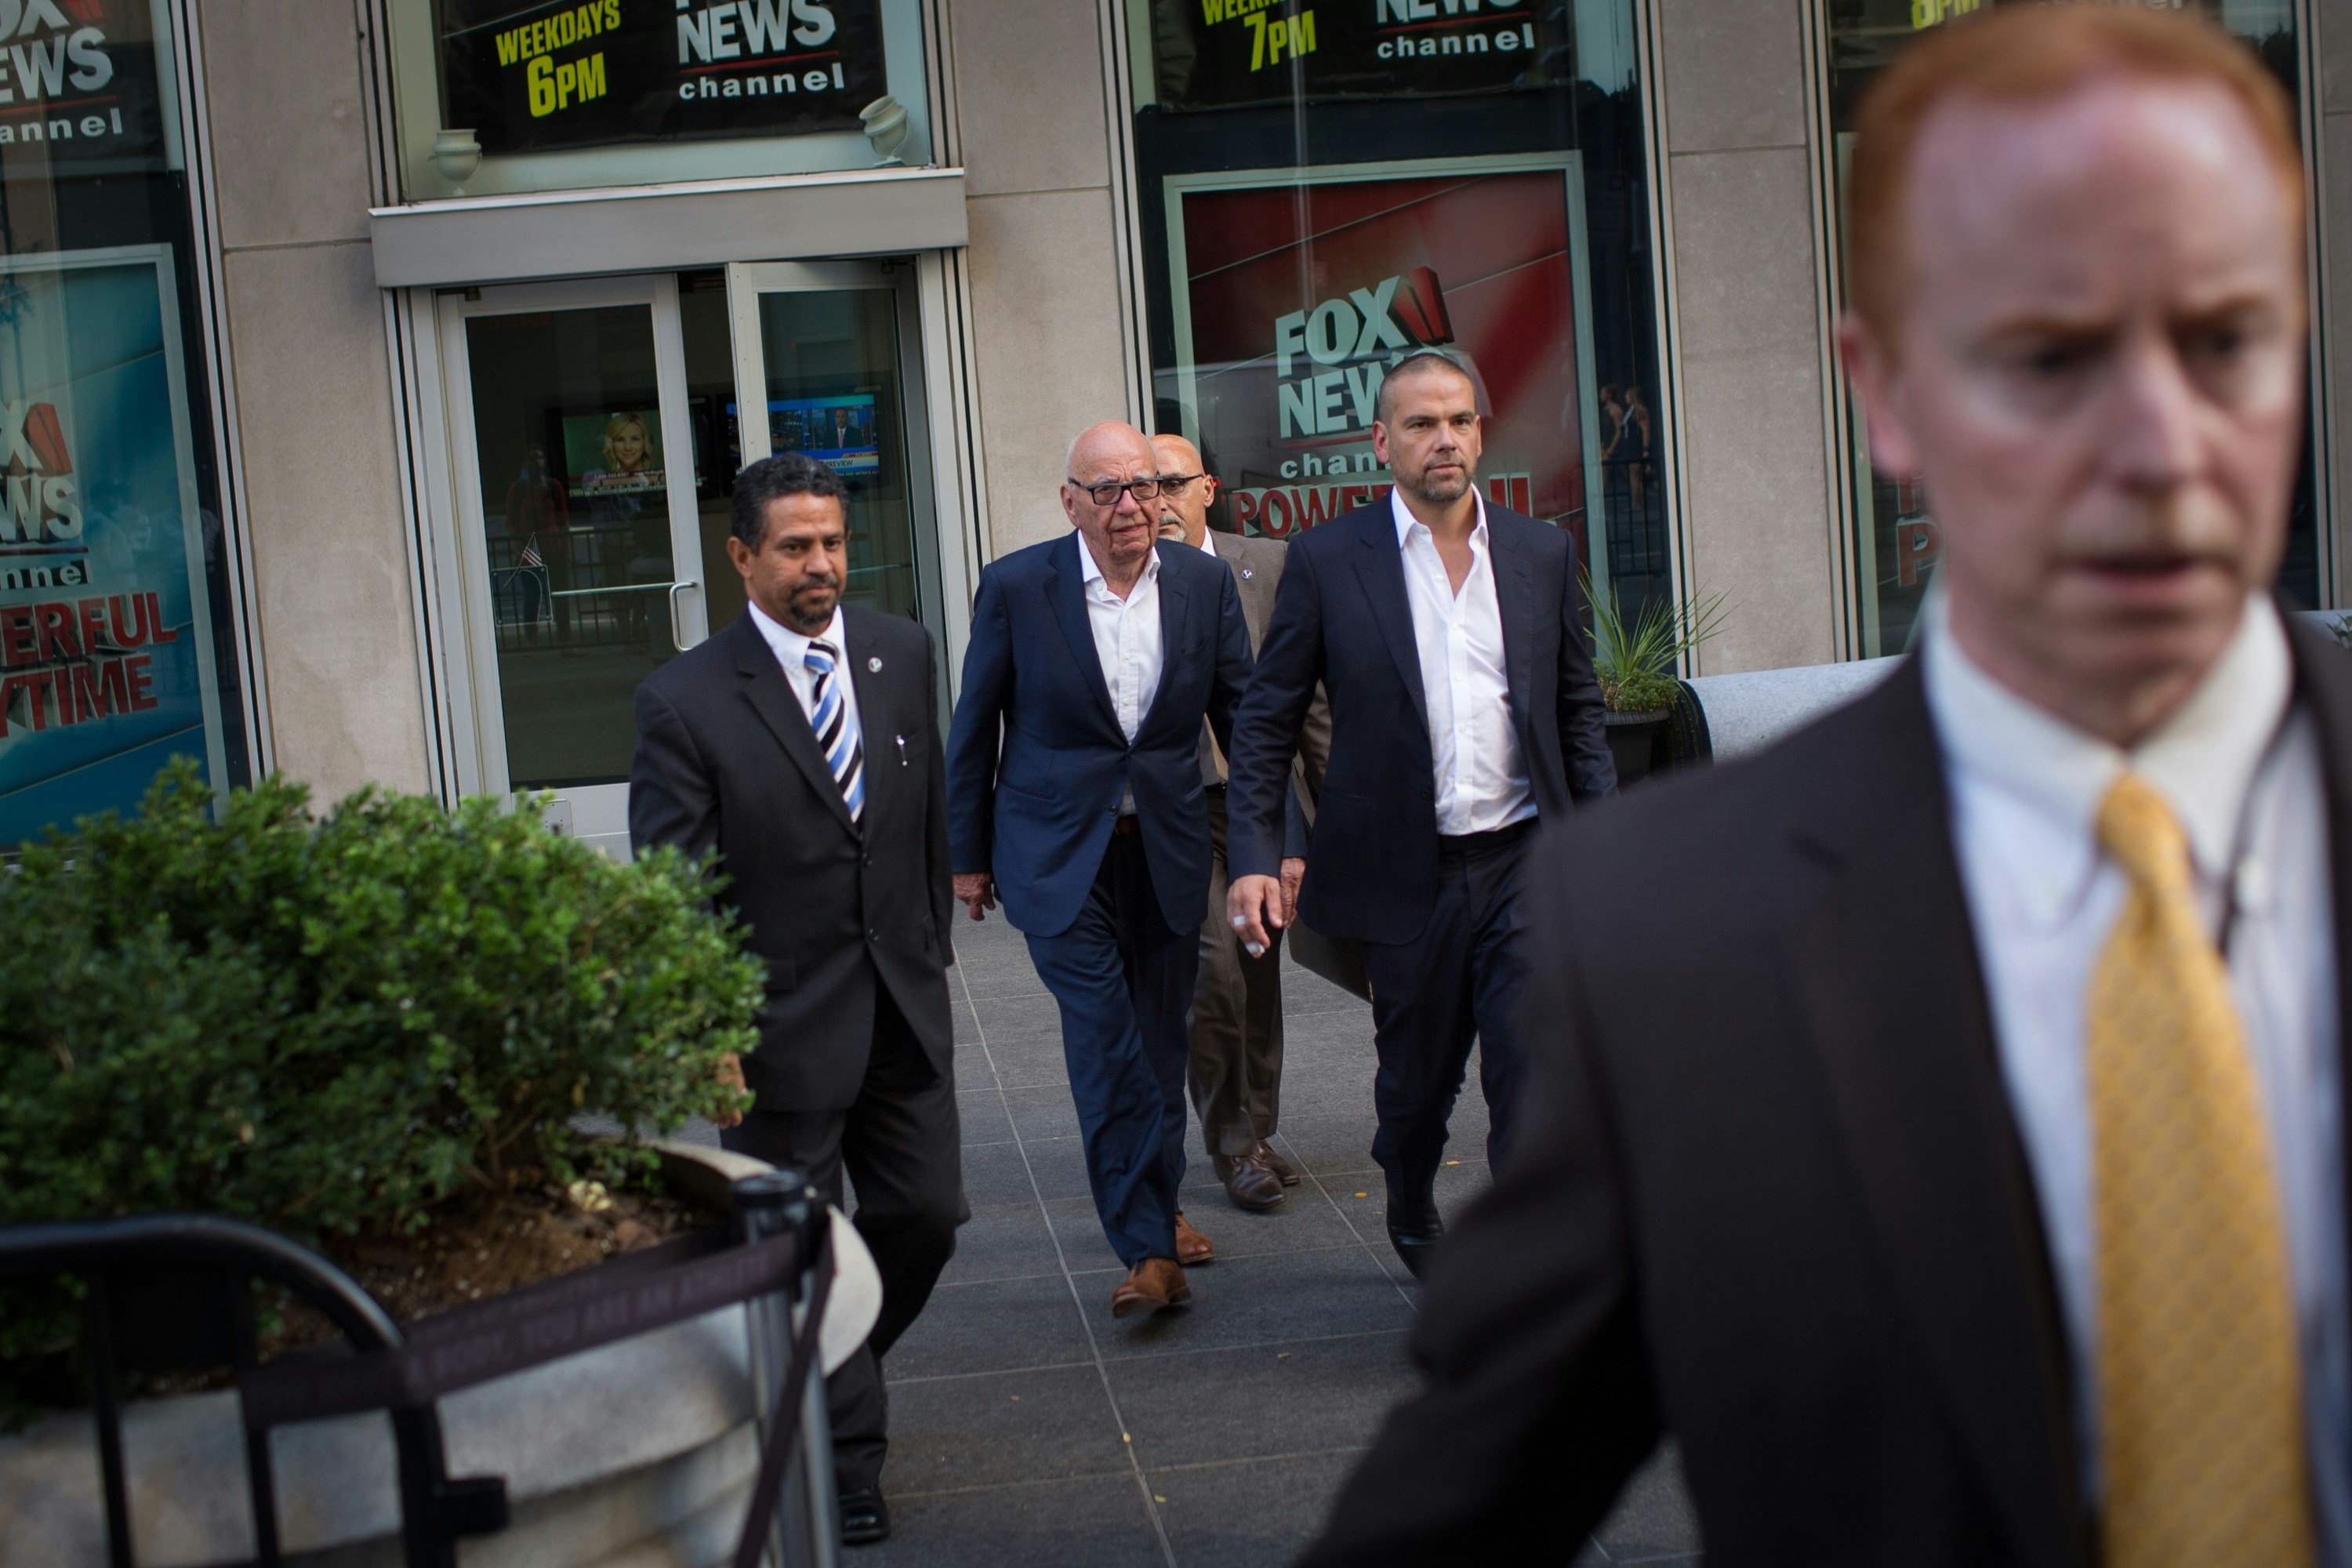 NEW YORK, NY - JULY 21: Rupert Murdoch (C) leaves the News Corporation building with his son Lachlan Murdoch (2-R) on July 21, 2016 in New York City. Rupert Murdoch is taking over as Chairman and CEO of Fox News Channel after former Chairman and CEO Roger Ailes departed the company today amid sexual harassment charges. (Photo by Kevin Hagen/Getty Images)